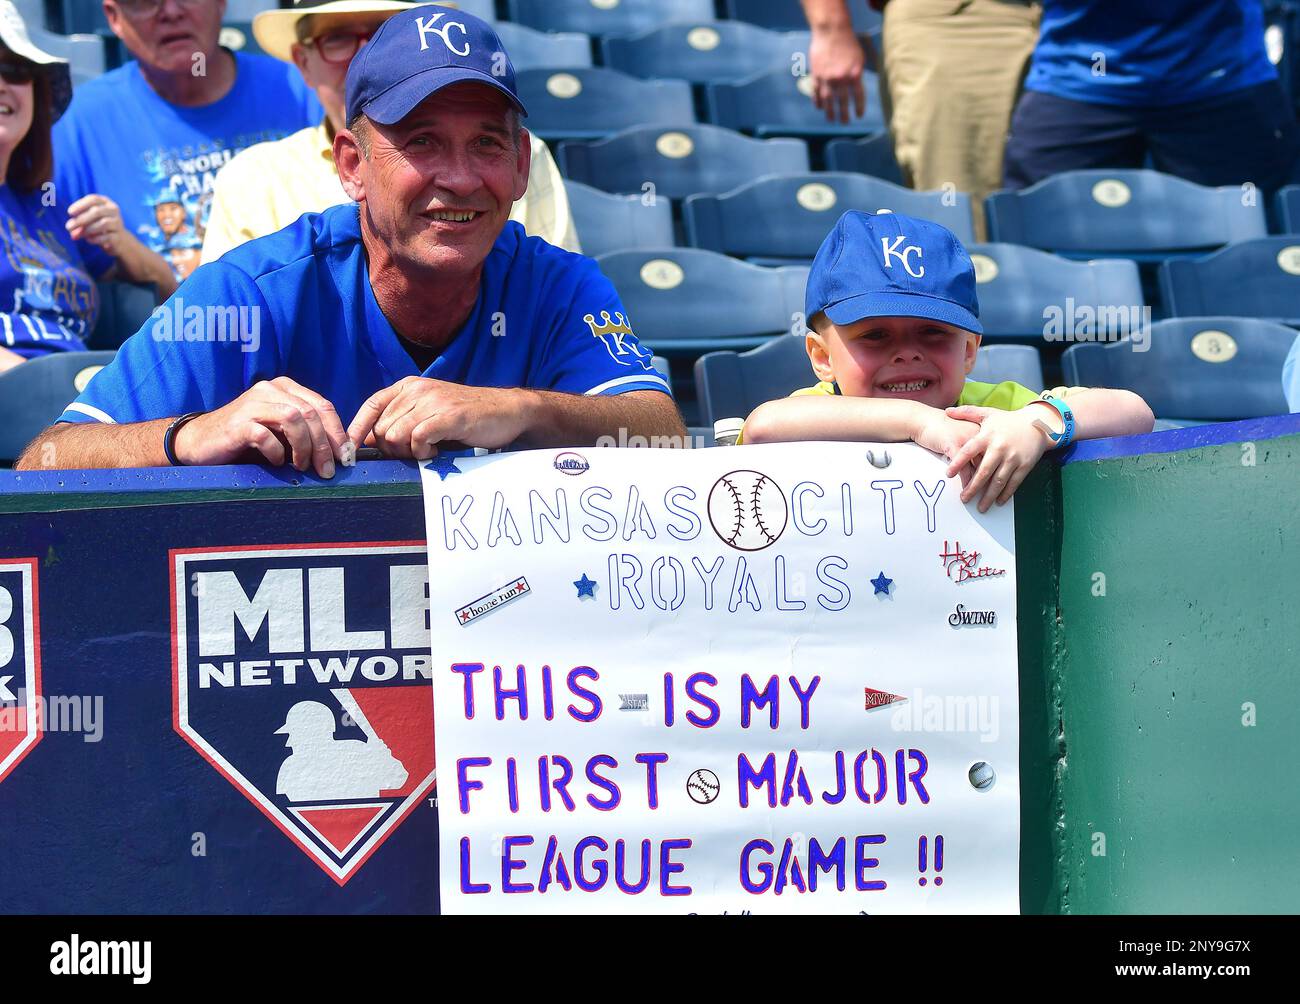 KANSAS CITY, MO - SEPTEMBER 13: A grandfather and grandson as seen before a  Major League baseball game between the Chicago White Sox and the Kansas City  Royals on September 13, 2017